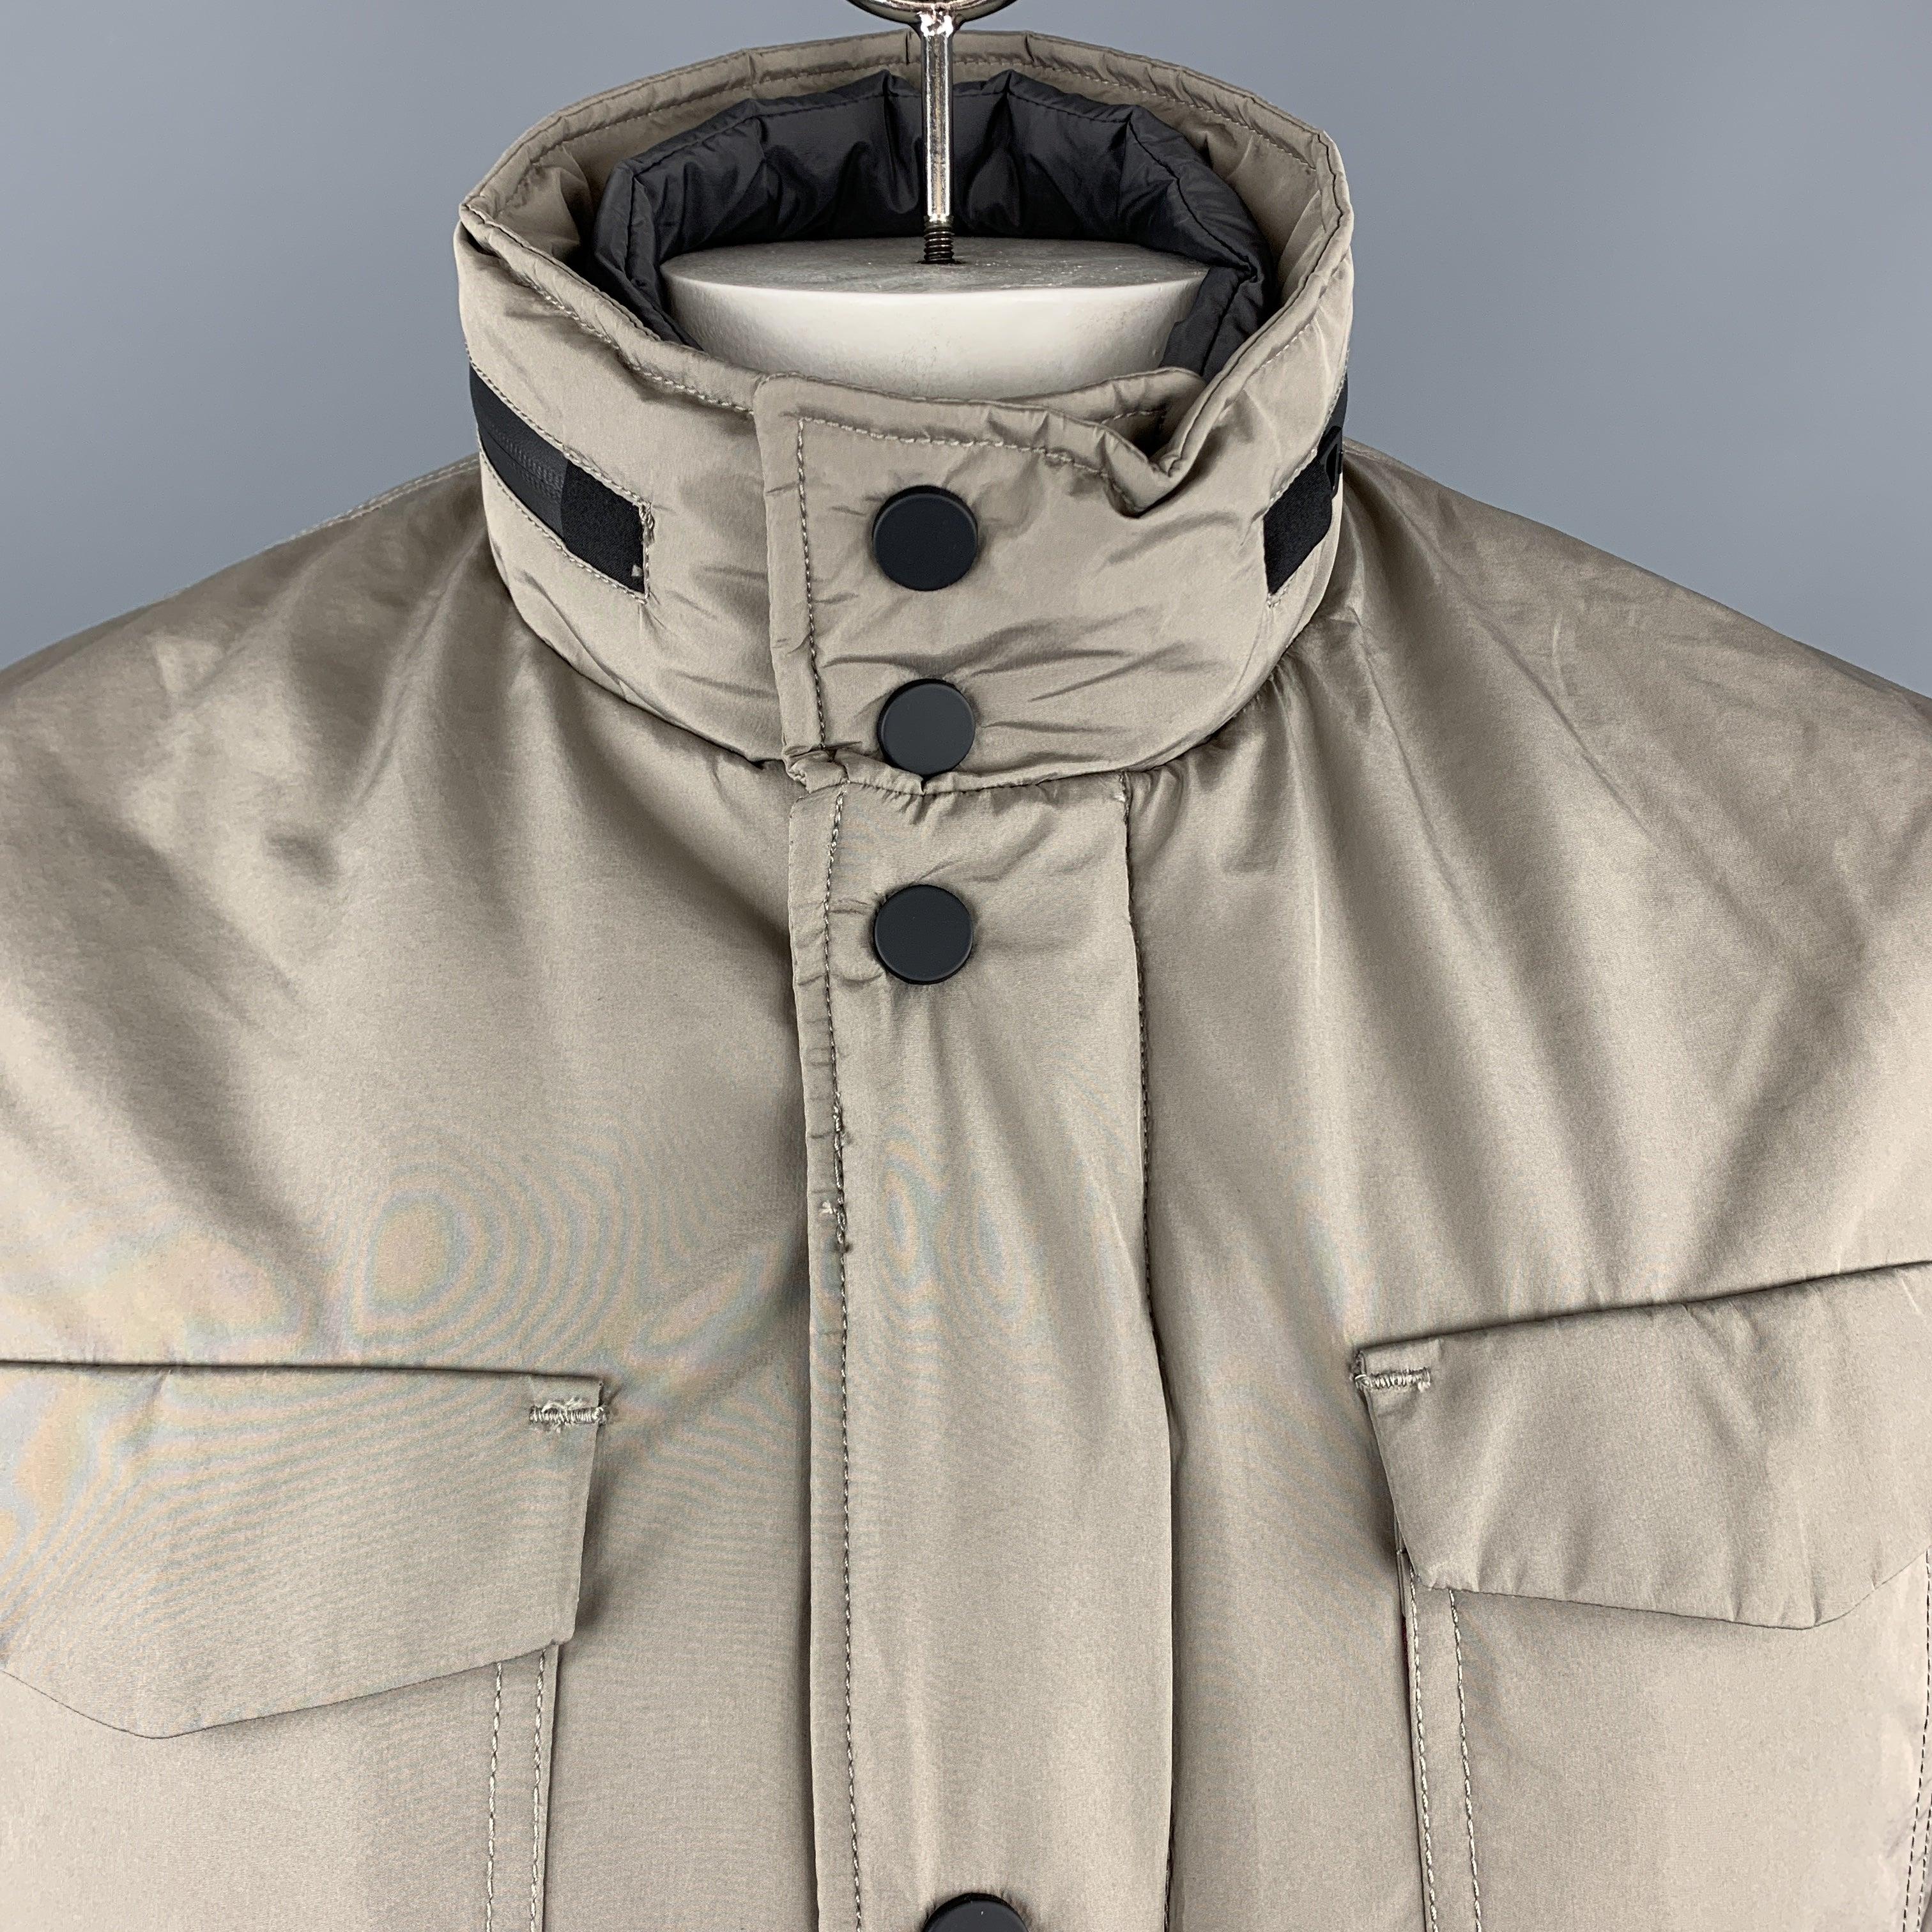 EREDI PISANO jacket comes in a khaki beige waterproof fabric with a zip up snap placket closure, patch flap pockets, waterproof zippers, high collar with tight zip out hood, and detachable front panel. Made in Italy.New With Tags.  

Marked:   50